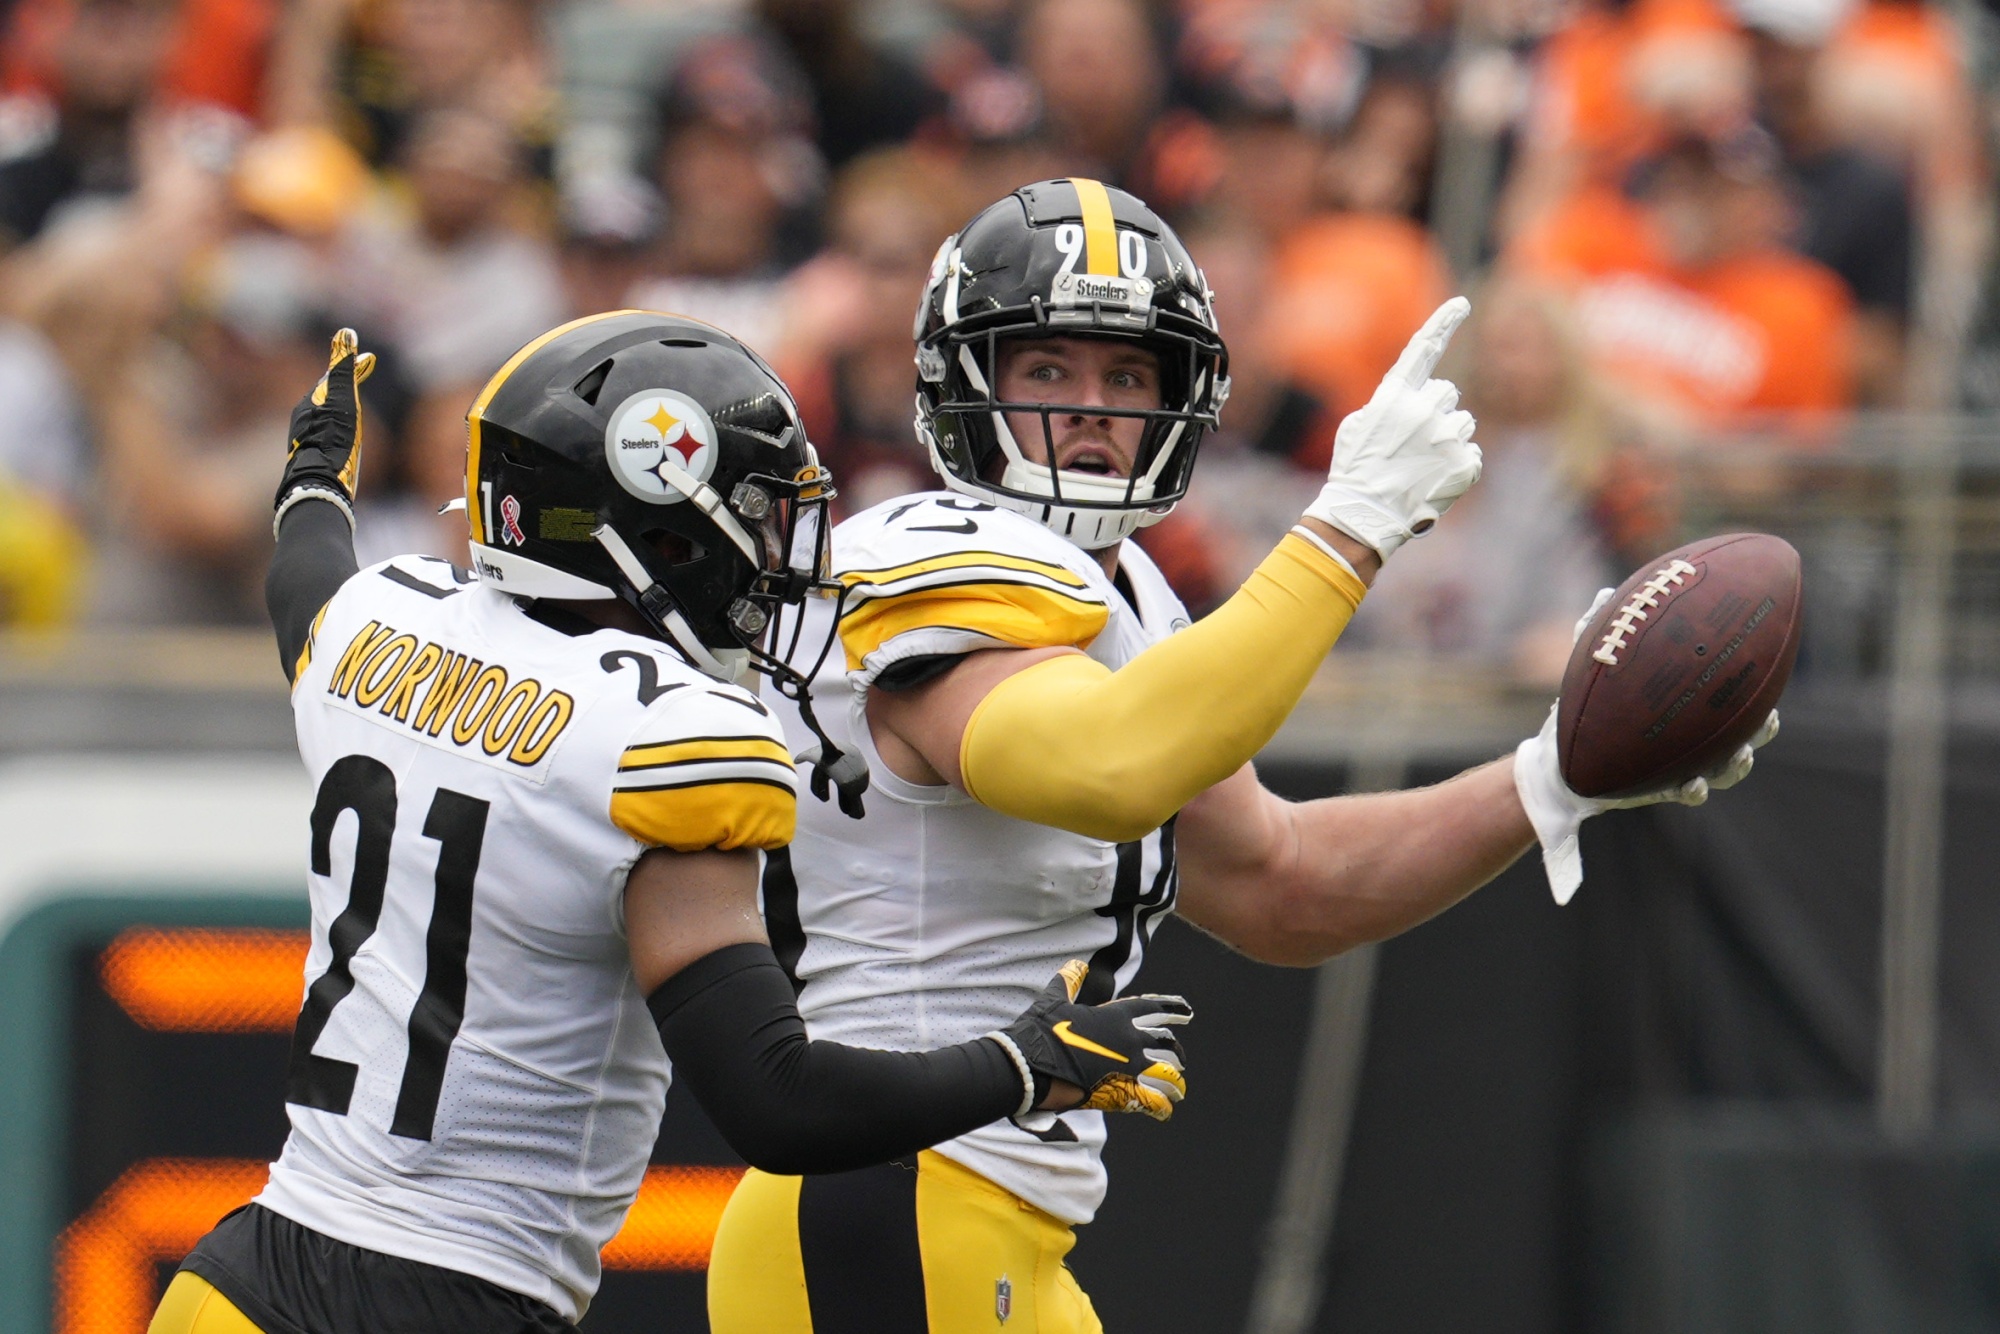 Steelers Star TJ Watt Out At Least 1 Game With Pec Injury - Bloomberg